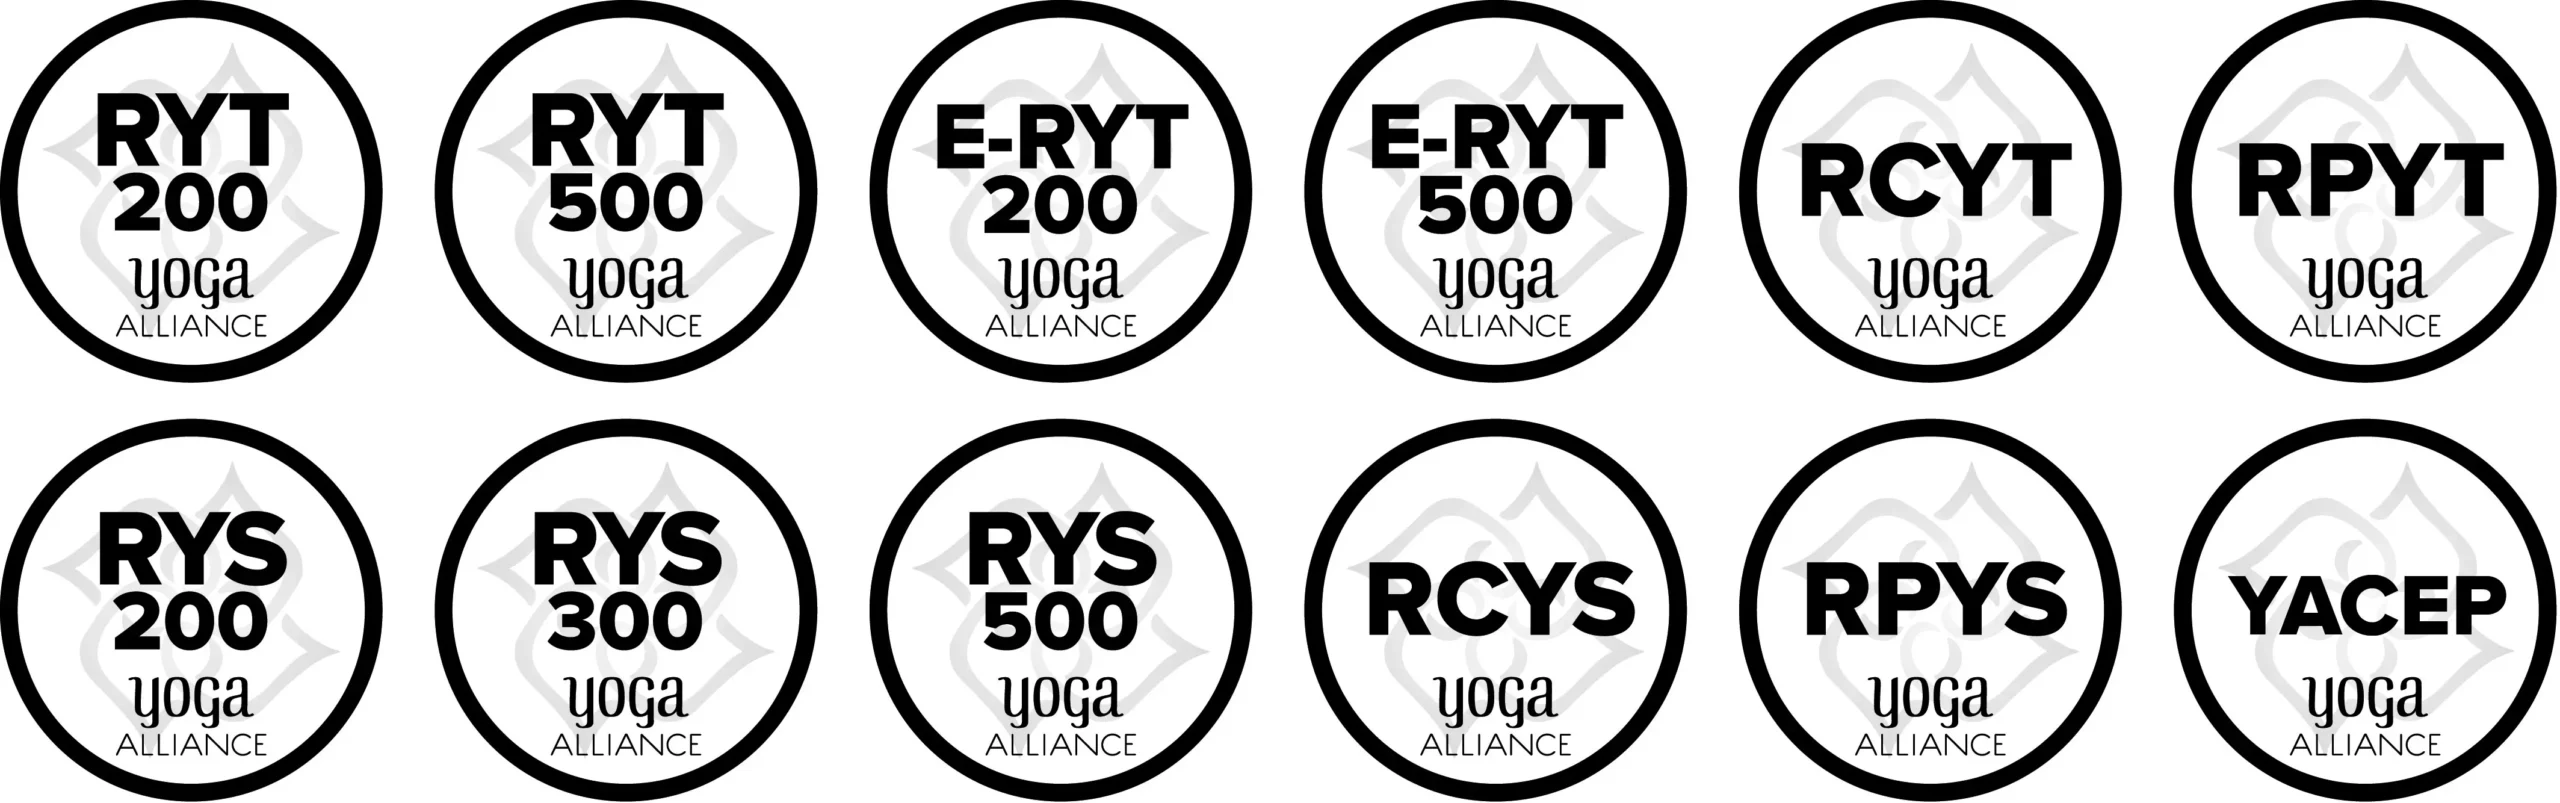 ryt yoga alliance registration - What is Yoga Alliance requirements